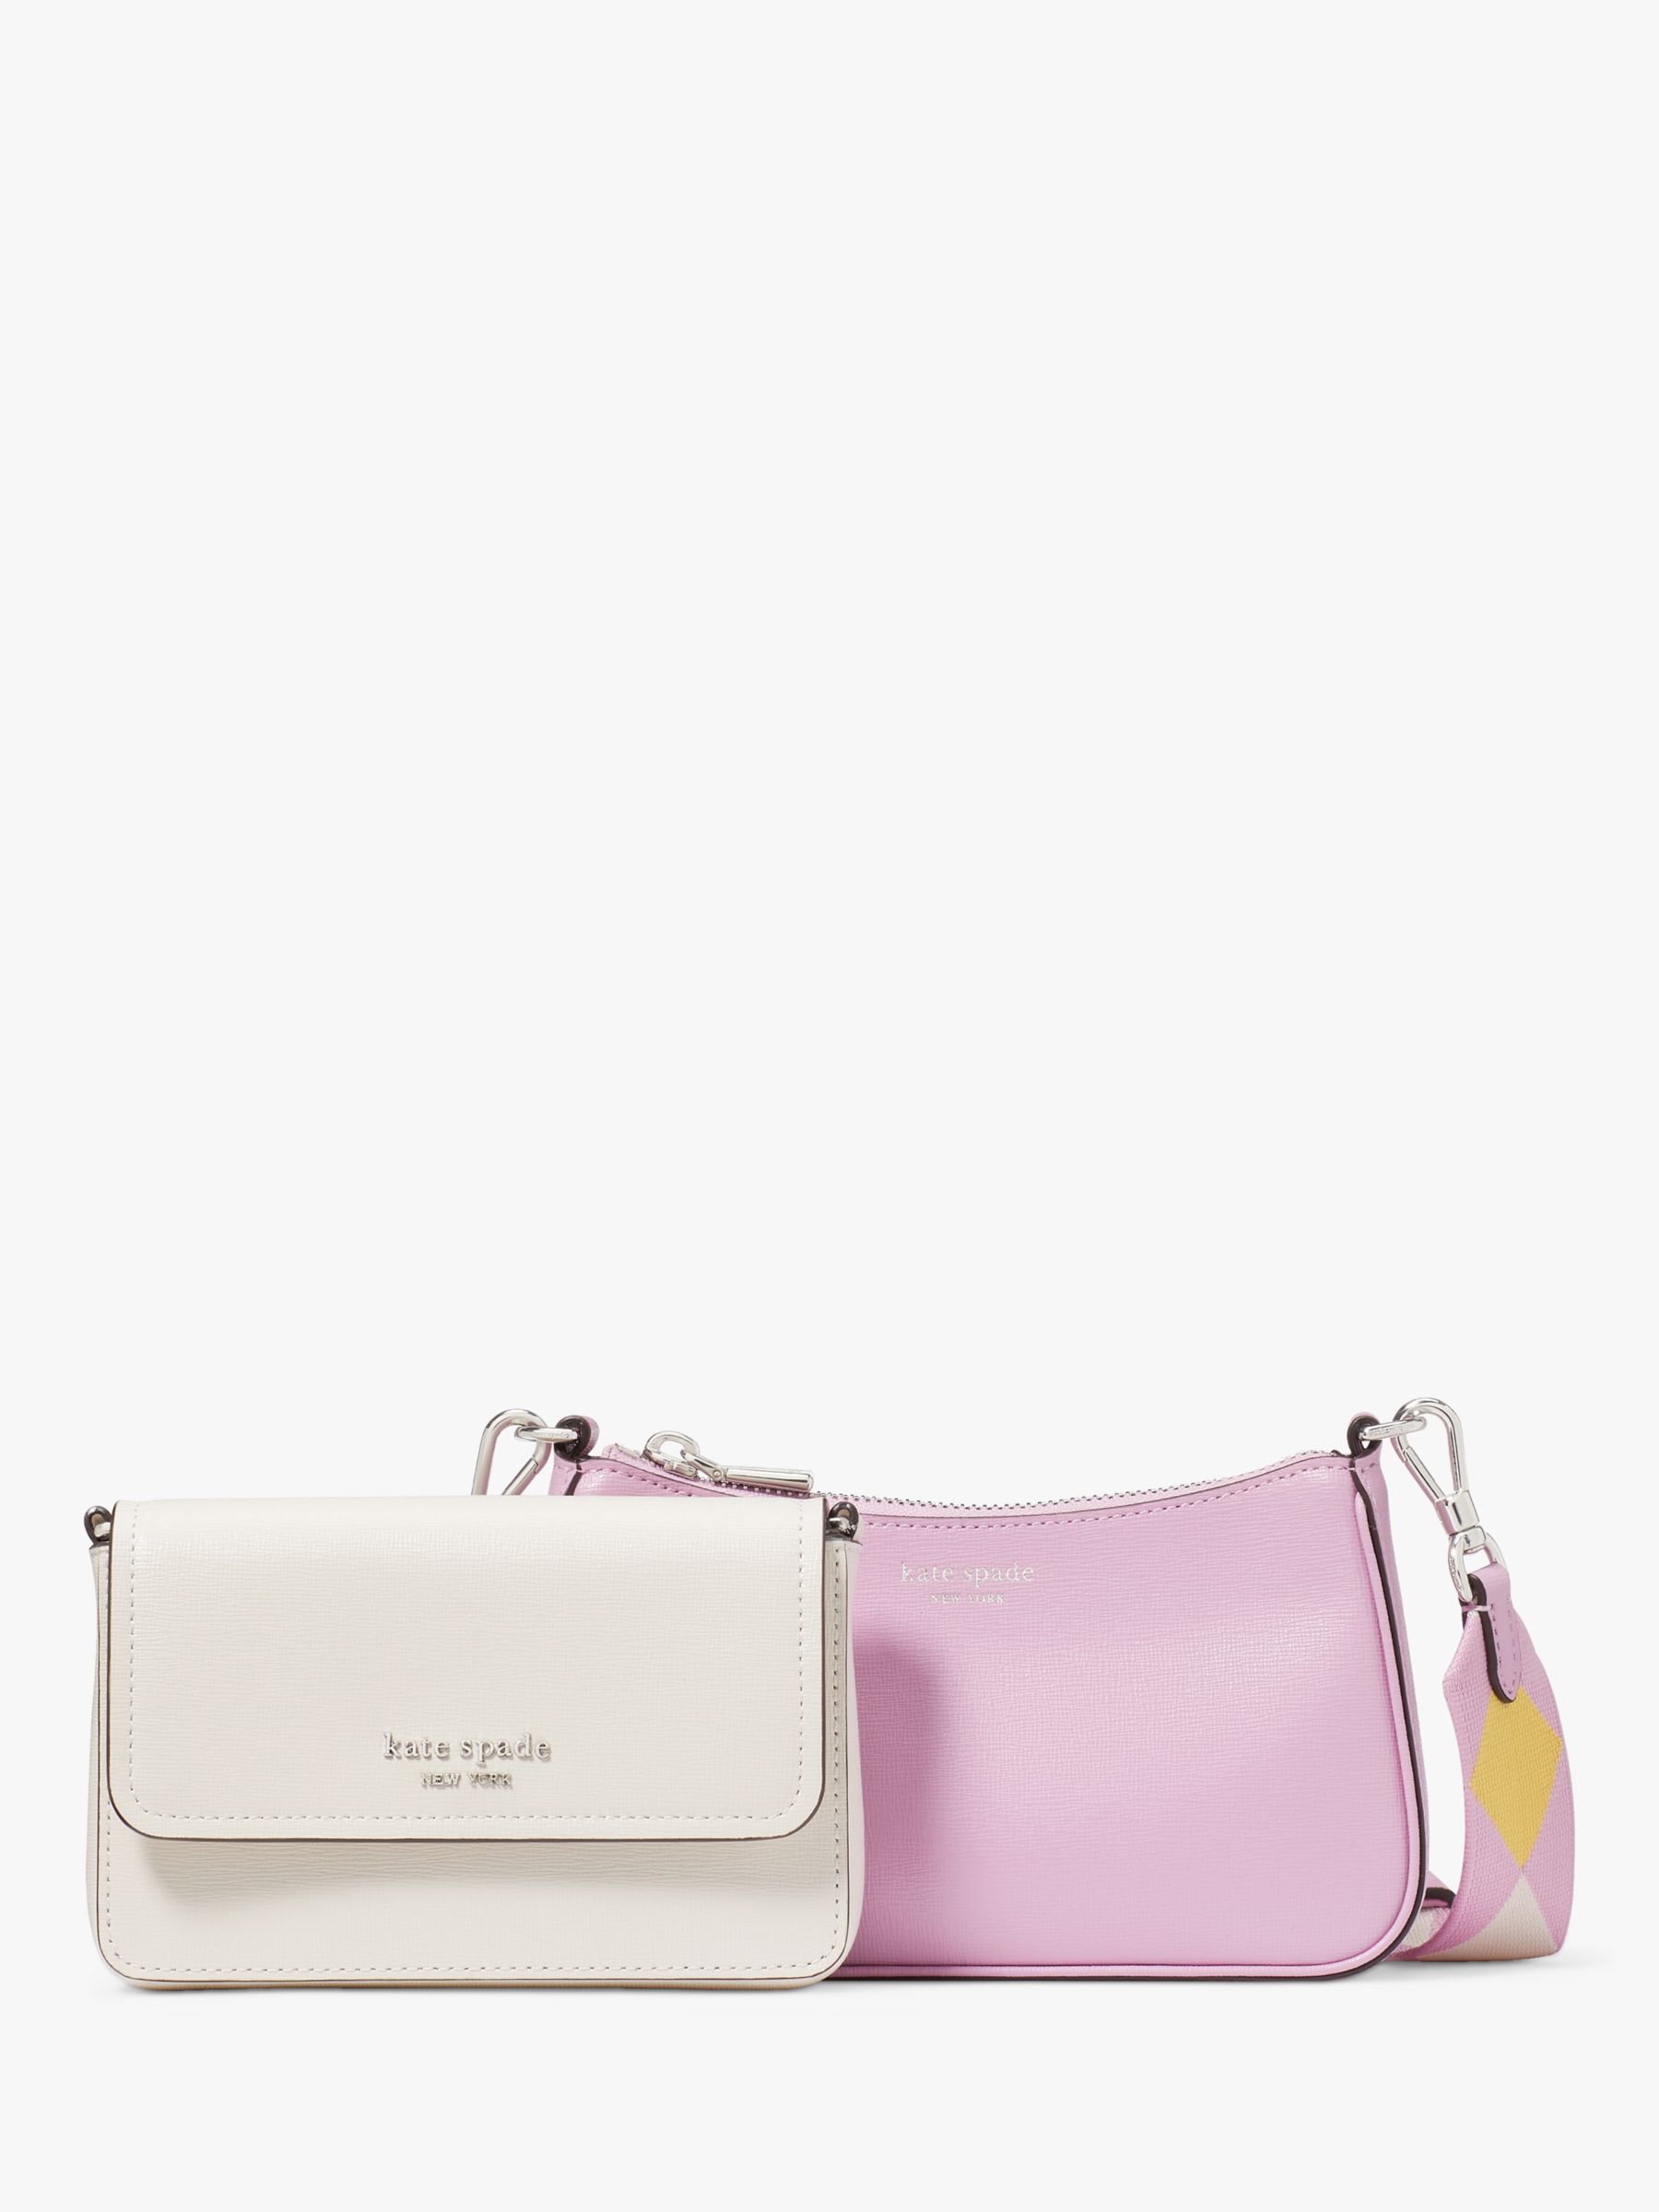 kate spade new york Double Up Leather Cross Body Bag, Parchment/Multi ...